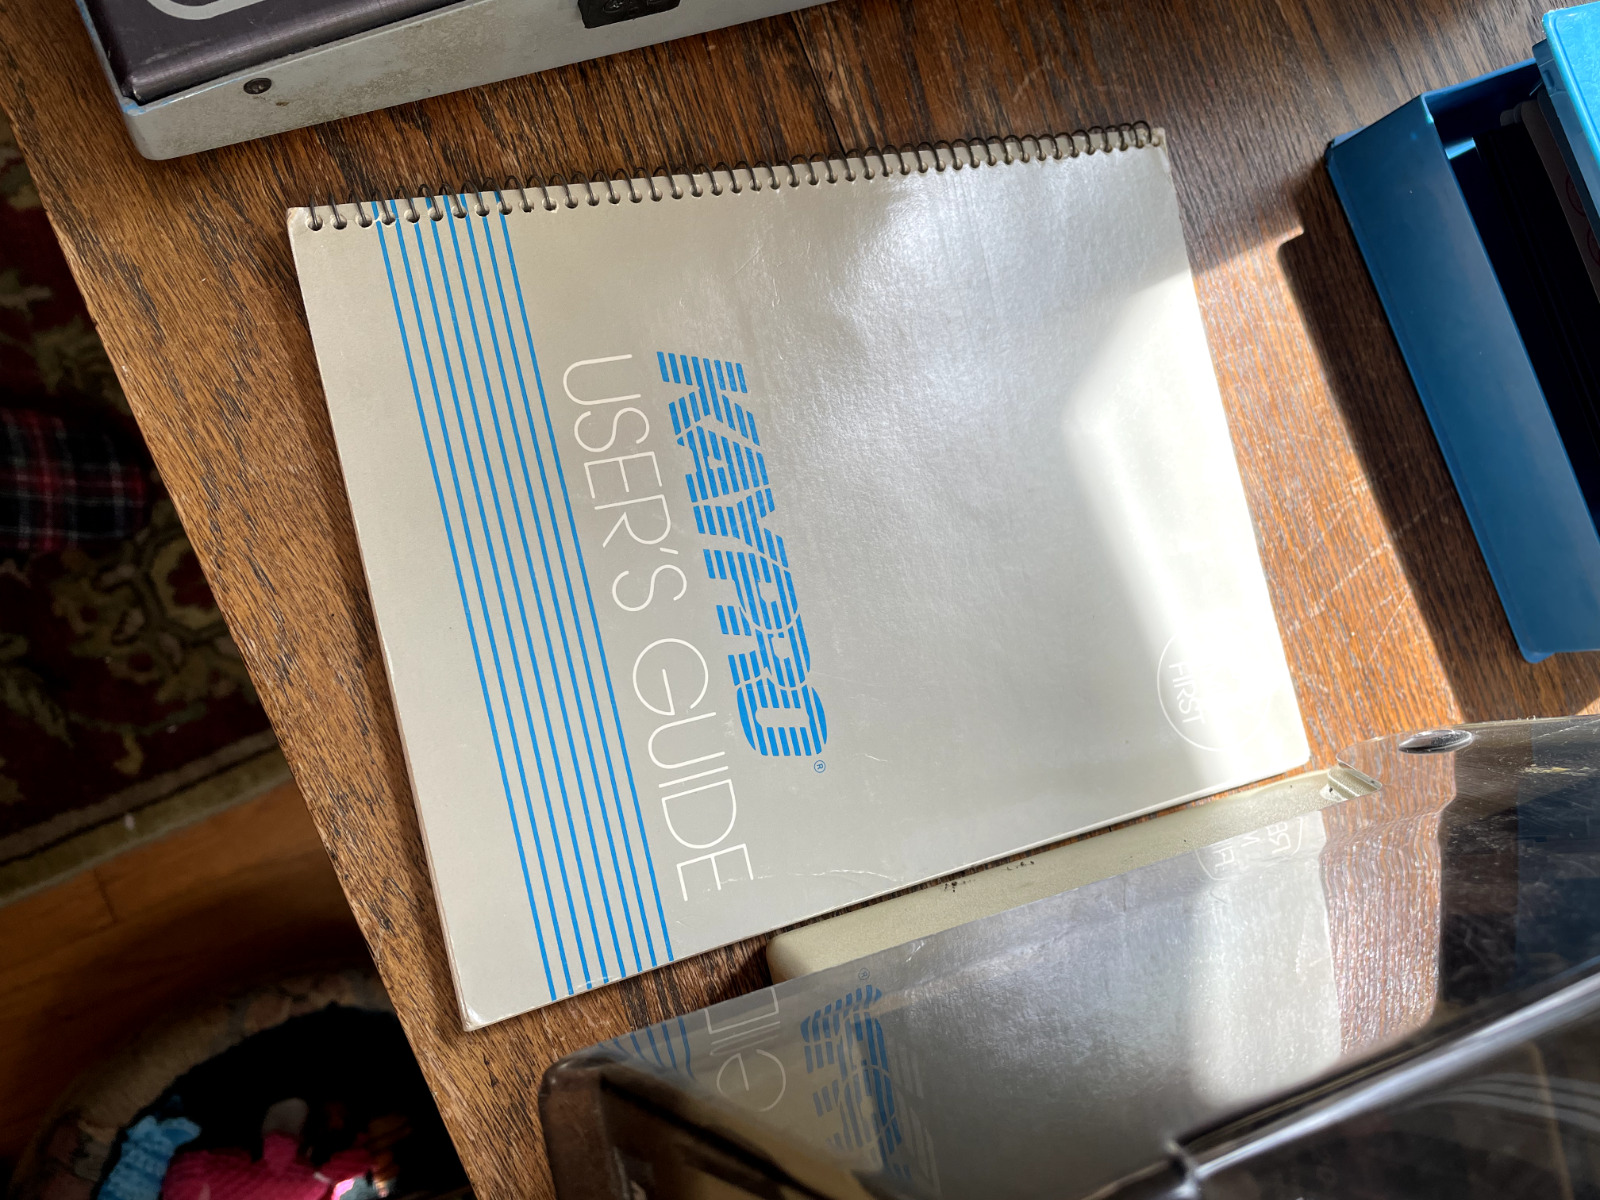 Kaypro books for Wordstar, Calcstar, Word Plus, and all other original programs